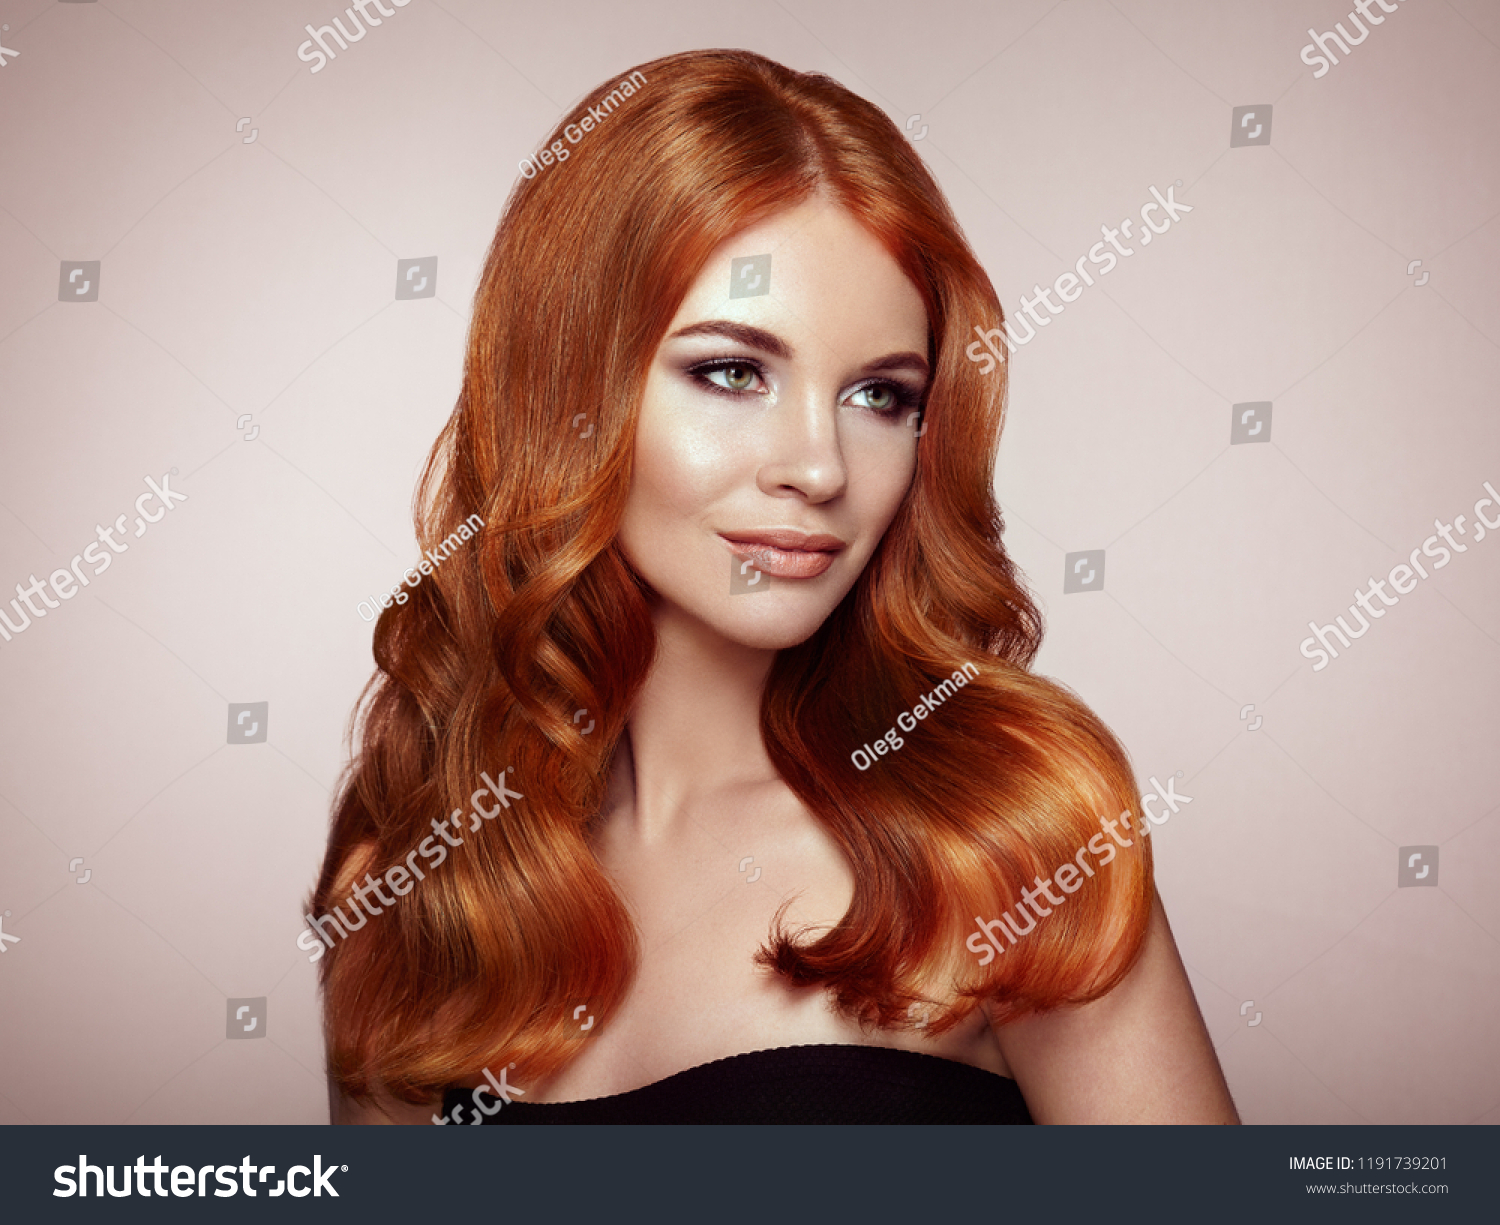 Redhead Girl with Long Healthy and Shiny Curly Hair. Care and Beauty. Beautiful Model Woman with Wavy Hairstyle. Make-Up and Black Dress #1191739201